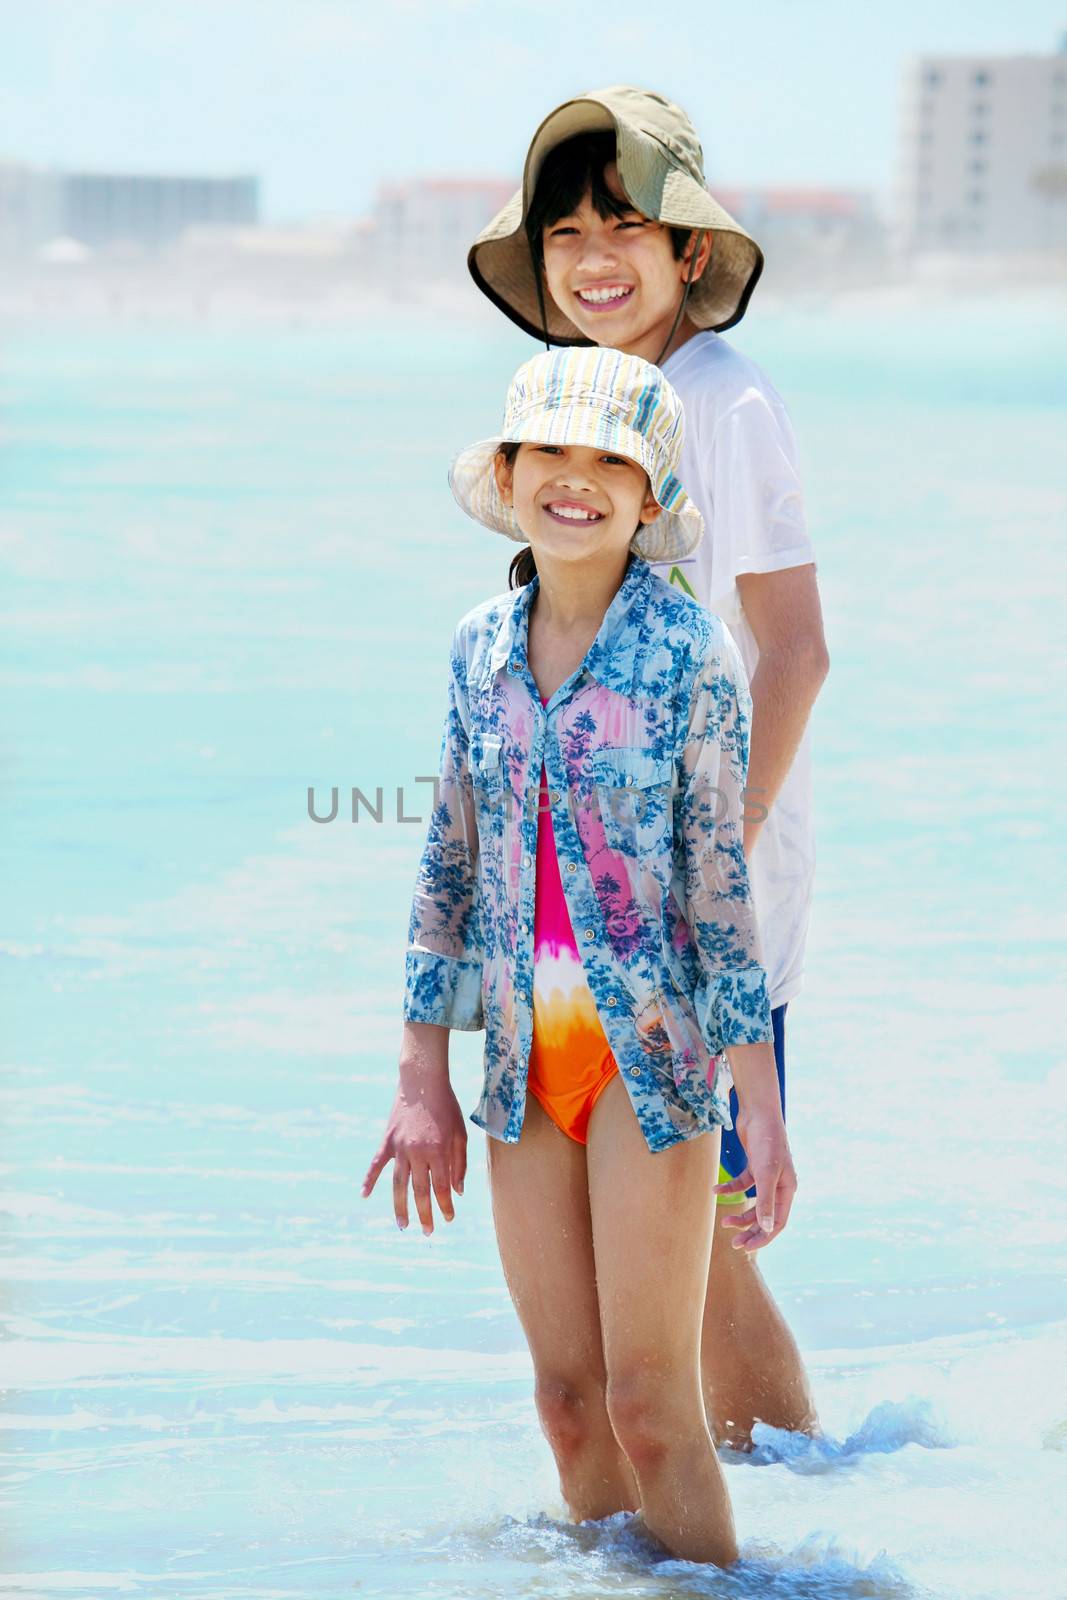 Two children wearing hats, playing in water's edge of ocean